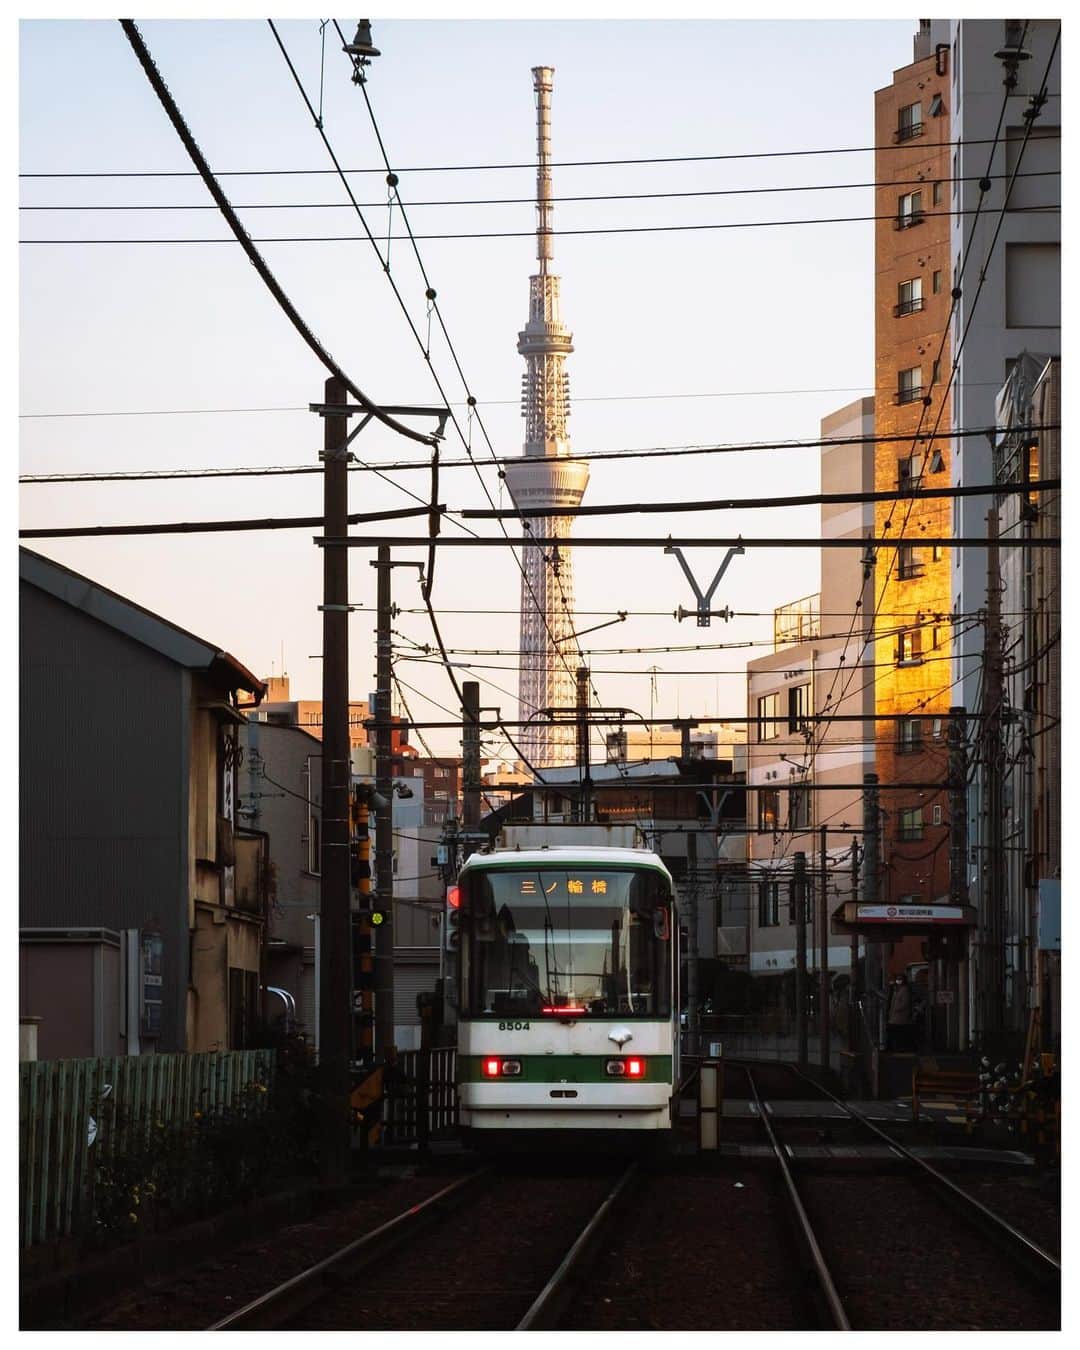 Takashi Yasuiのインスタグラム：「Tokyo 🚃 January 2021  📕My photo book - worldwide shipping daily - 🖥 Lightroom presets ▶▶Link in bio  #USETSU #USETSUpresets #TakashiYasui #SPiCollective #filmic_streets #ASPfeatures #photocinematica #STREETGRAMMERS #street_storytelling #bcncollective #ifyouleave #sublimestreet #streetfinder #timeless_streets #MadeWithLightroom #worldviewmag #hellofrom #reco_ig」